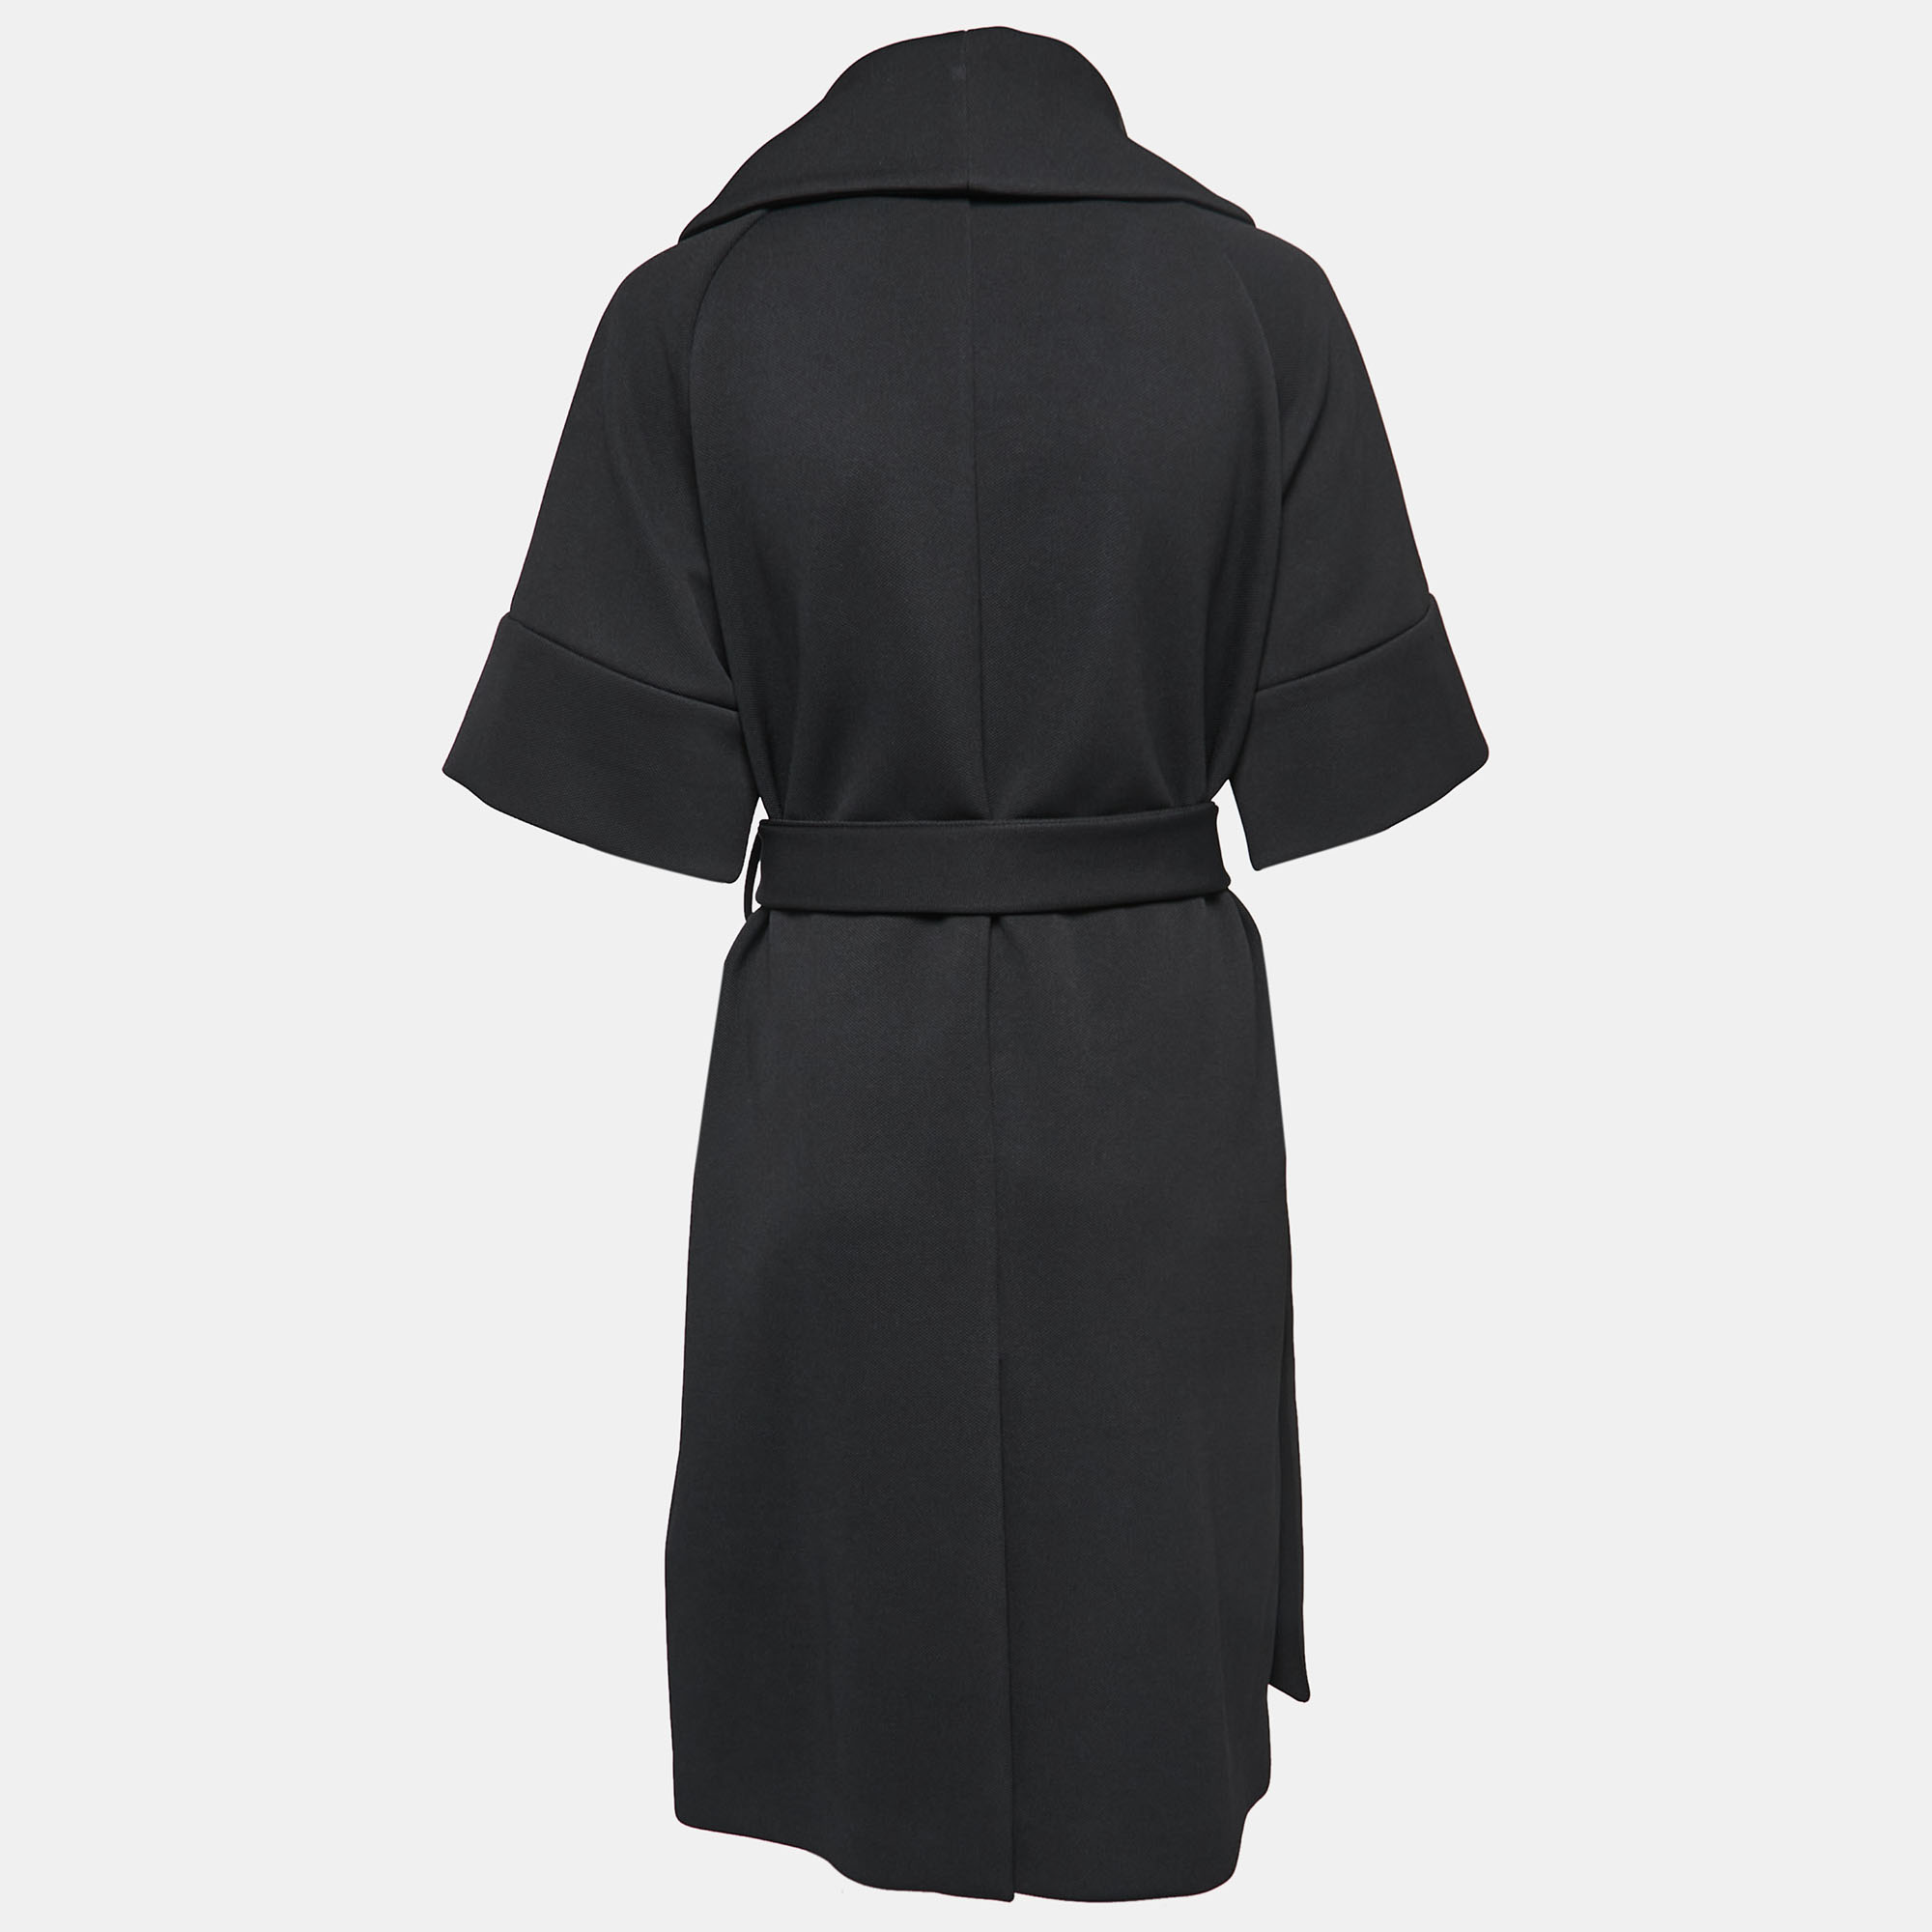 

Emporio Armani Black Textured Double Breasted Belted Coat